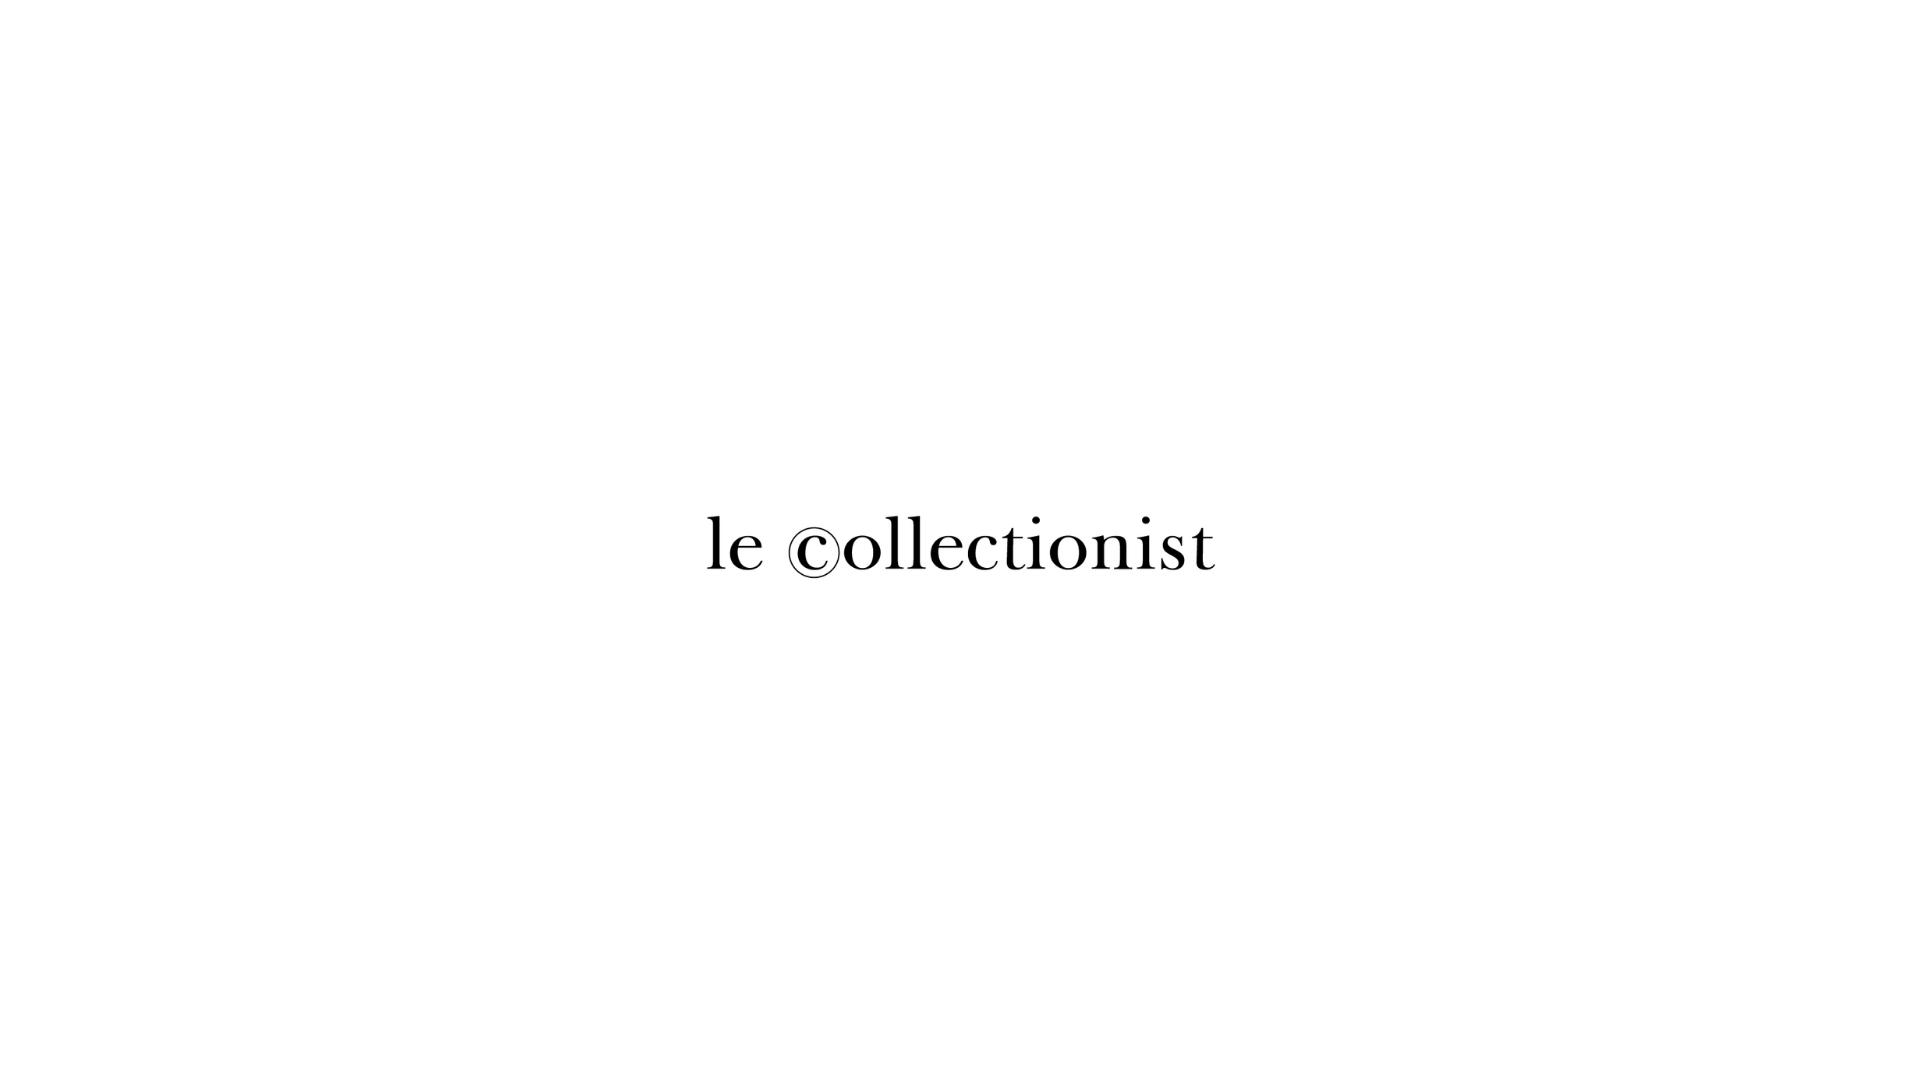 Le Collectionist